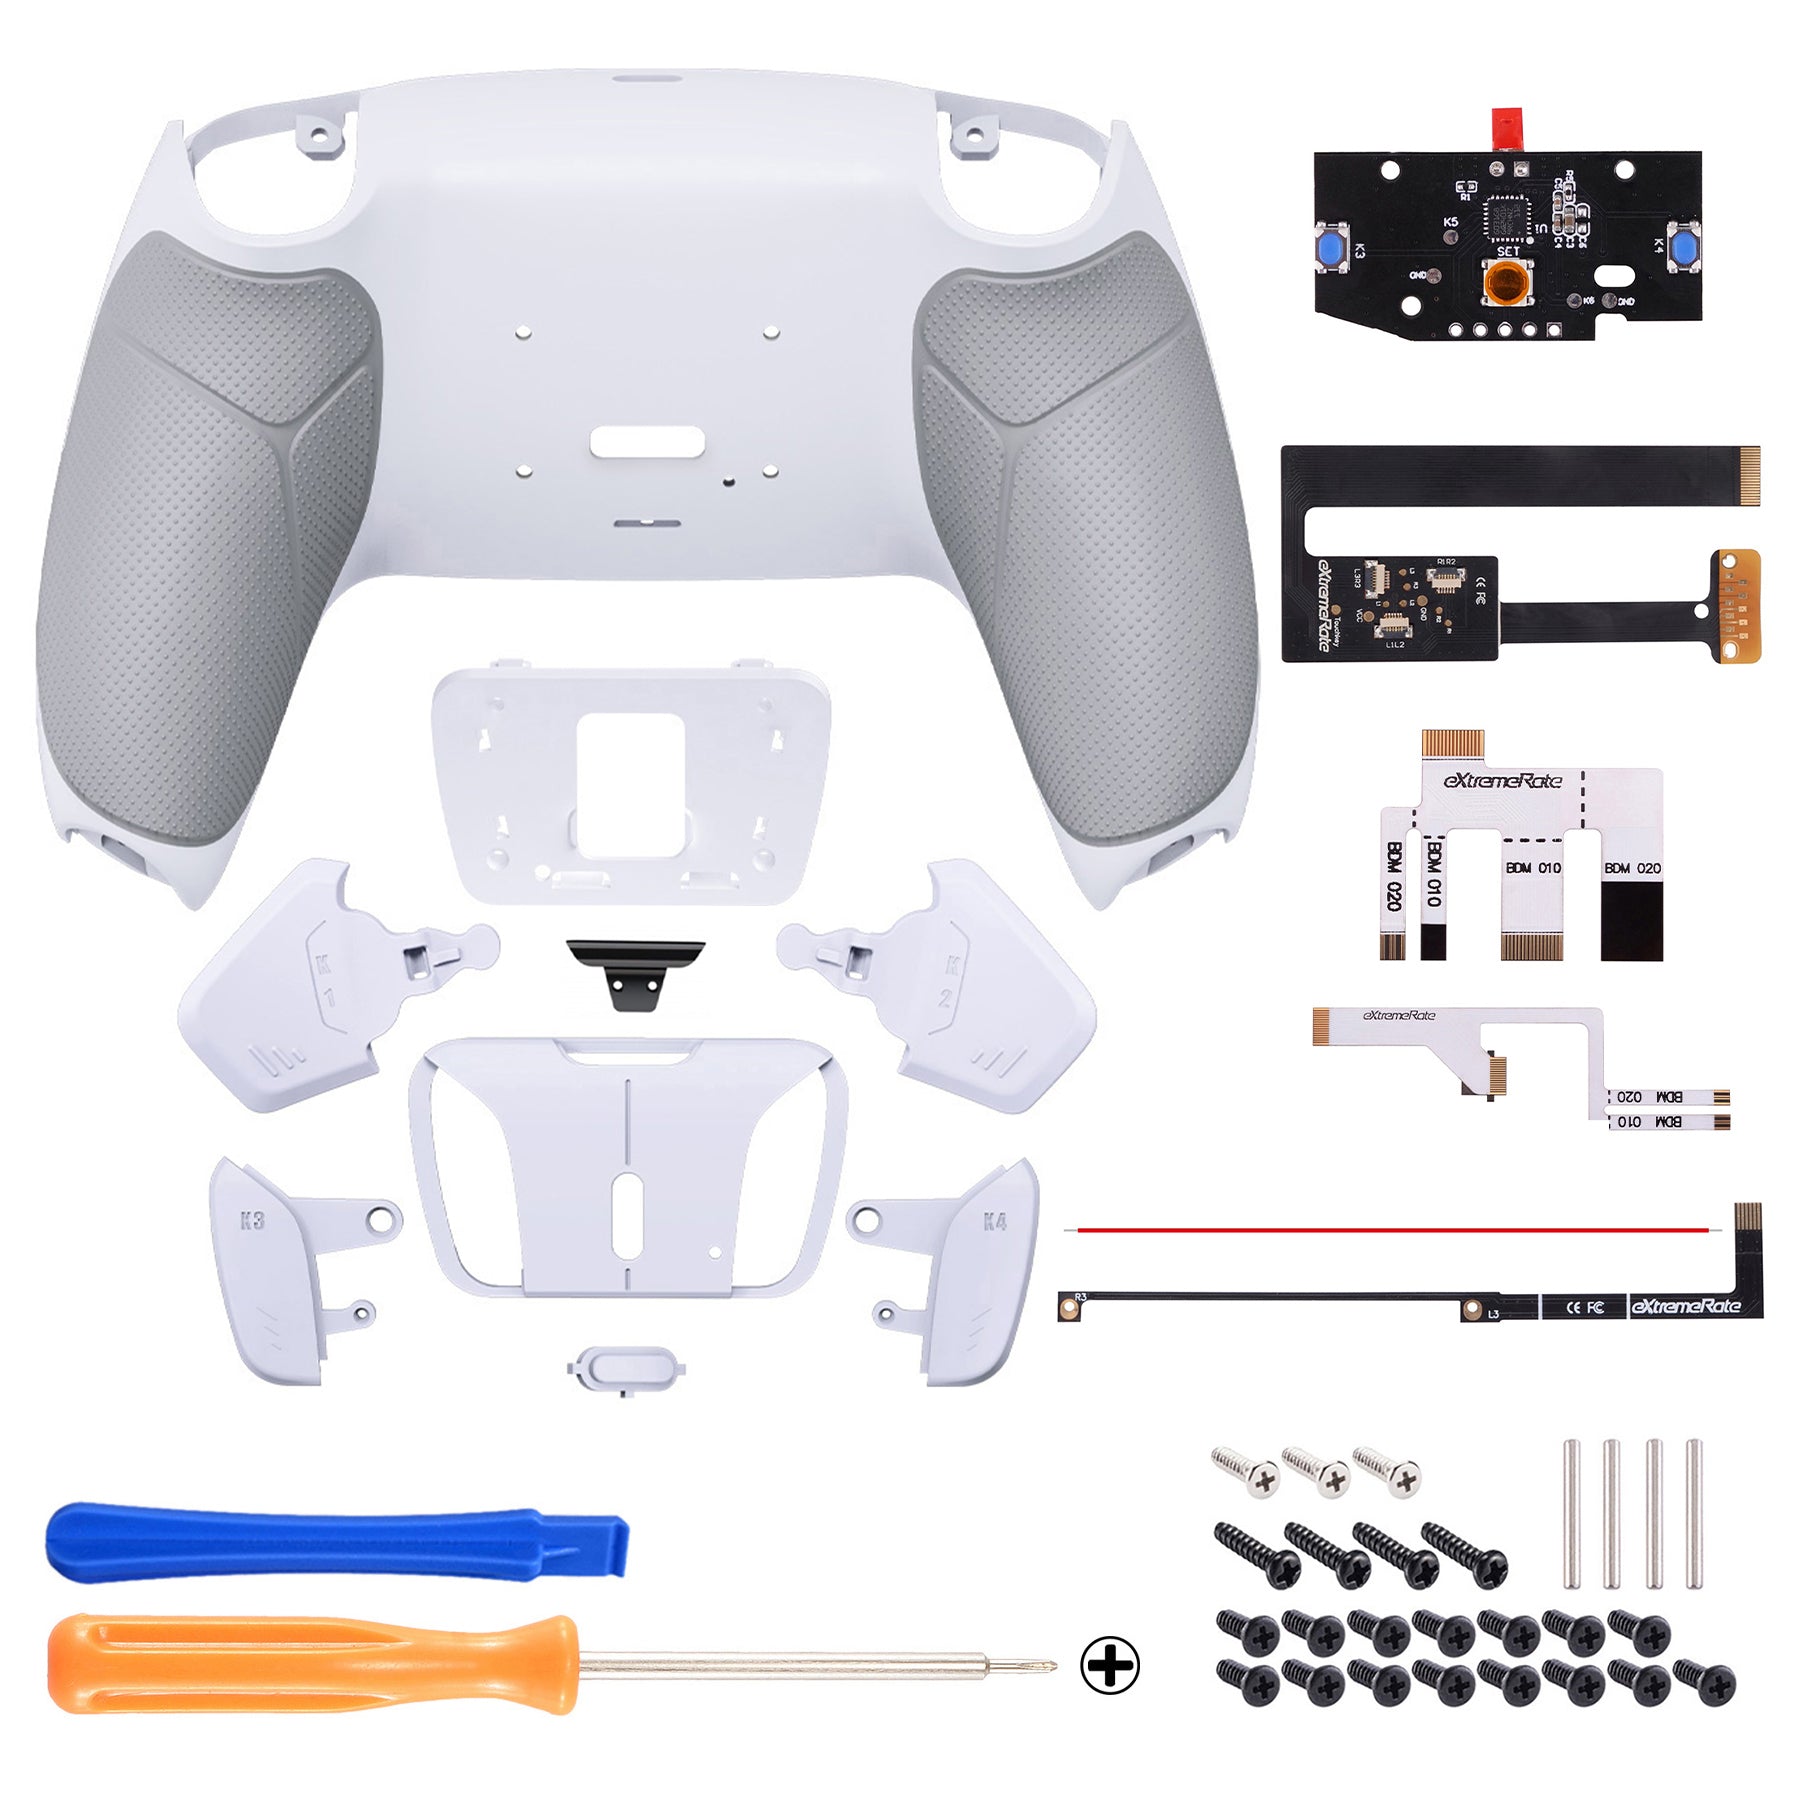 eXtremeRate Remappable RISE 4.0 Remap Kit for PS5 Controller BDM-010/020 - Rubberized White eXtremeRate